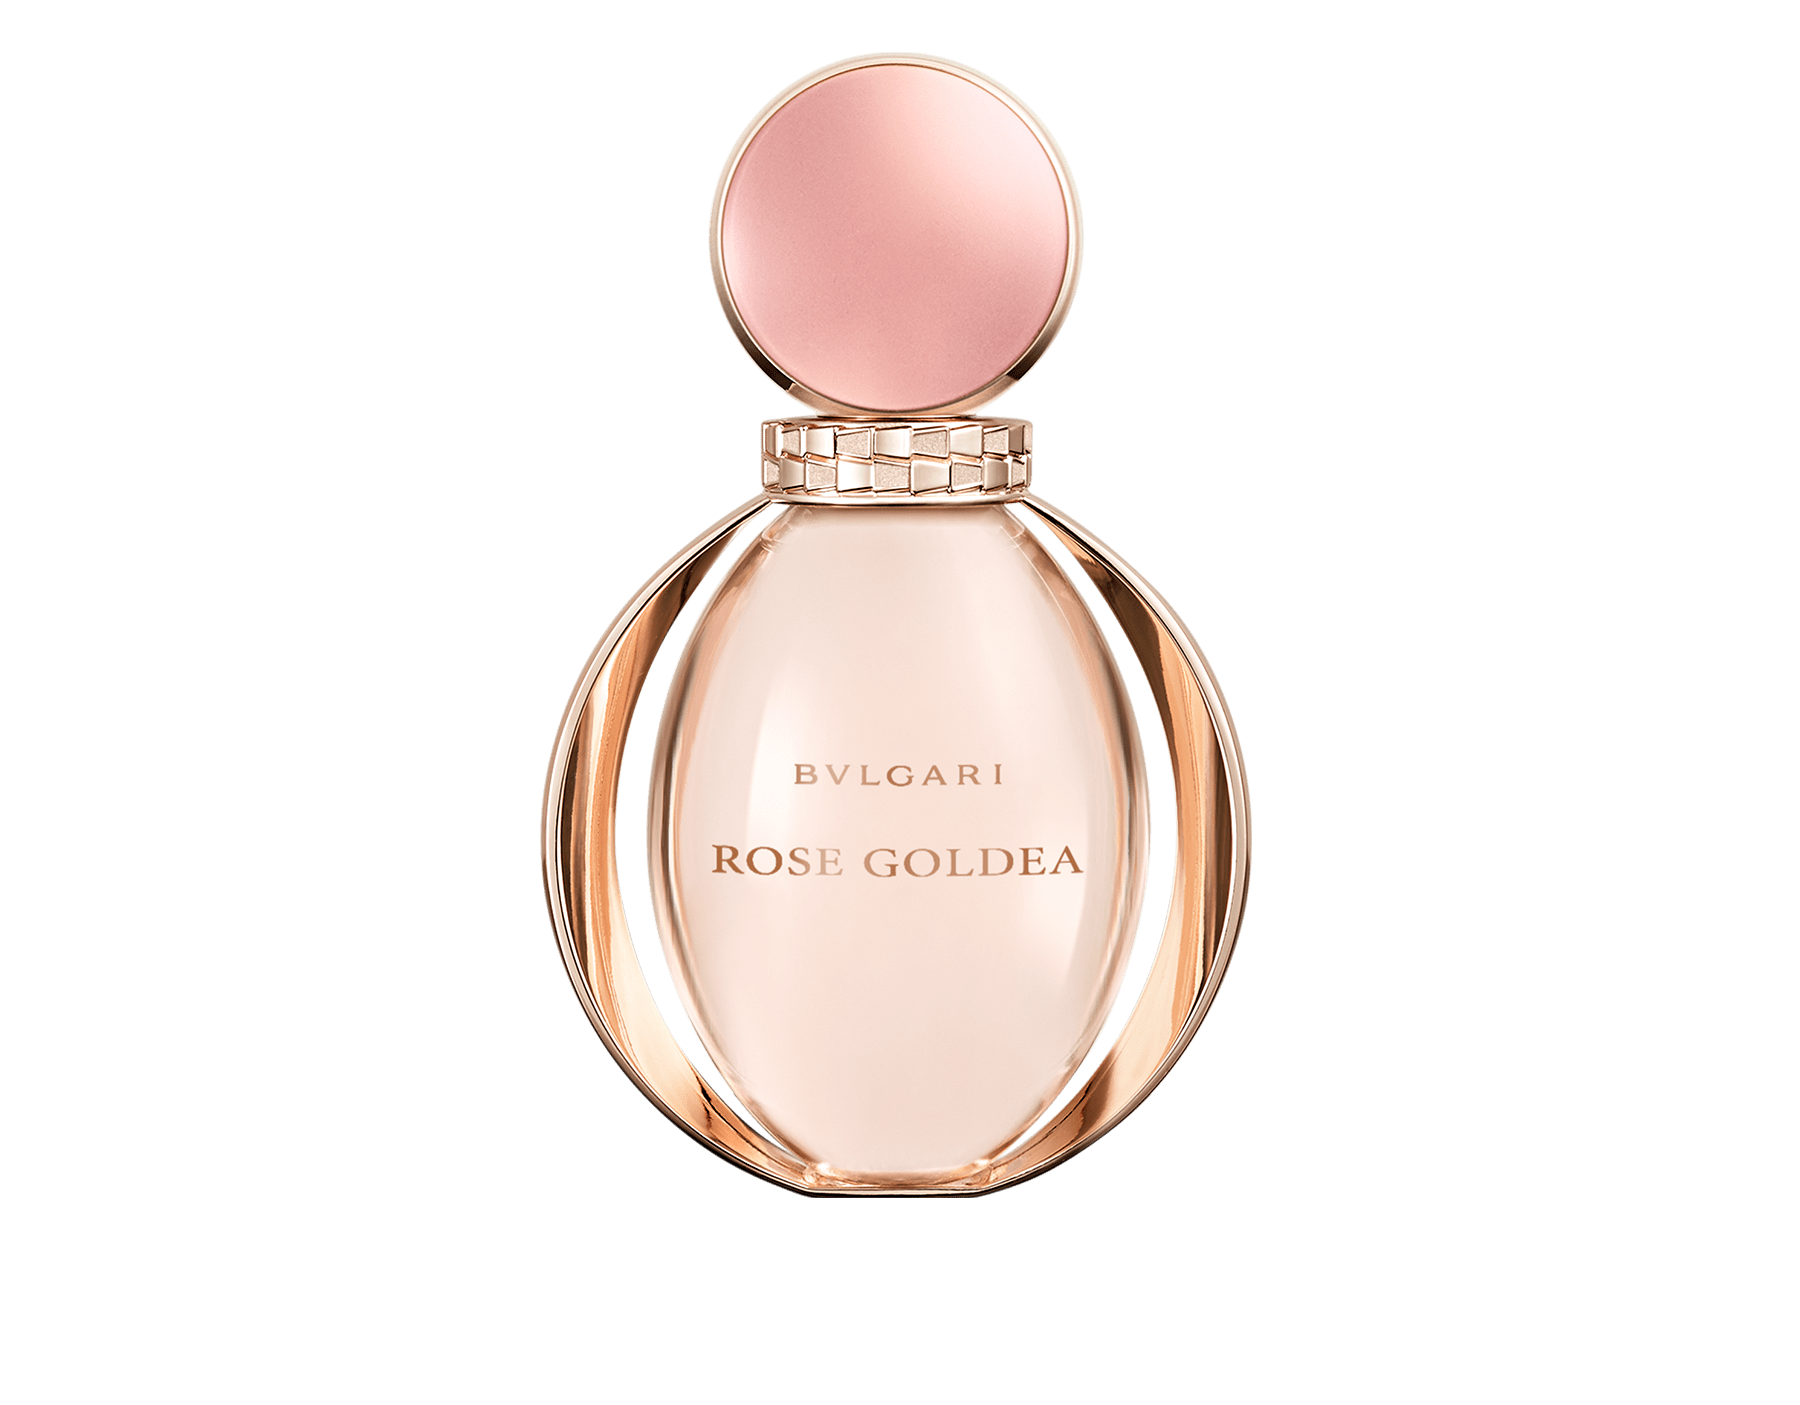 A classic floral fragrance created as a tribute to feminity. 50251 image 1